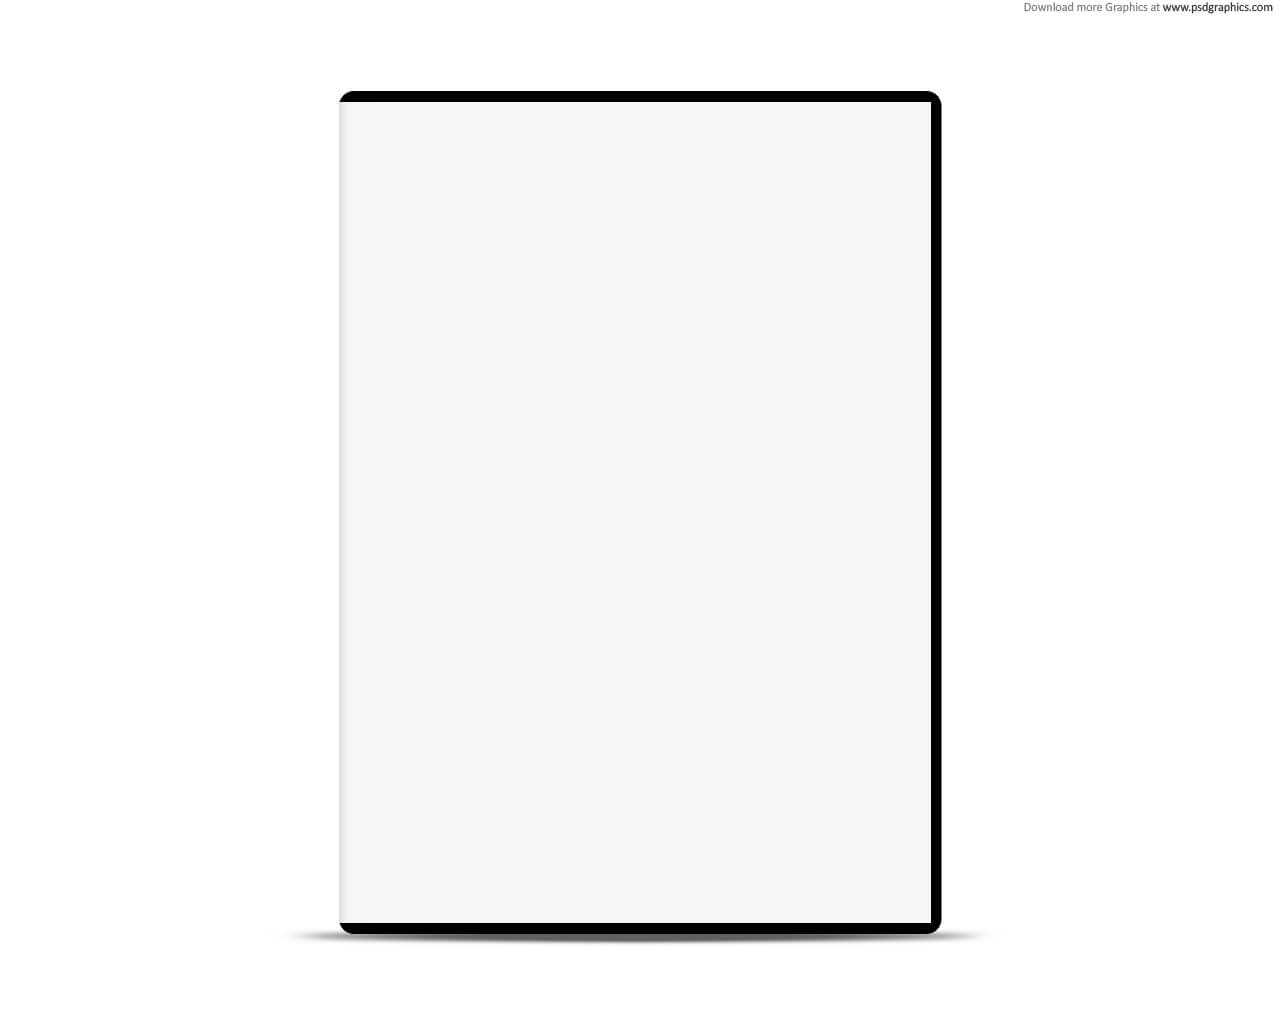 Blank White Case With Dvd, Psd Web Template | Psdgraphics Intended For Blank Magazine Template Psd